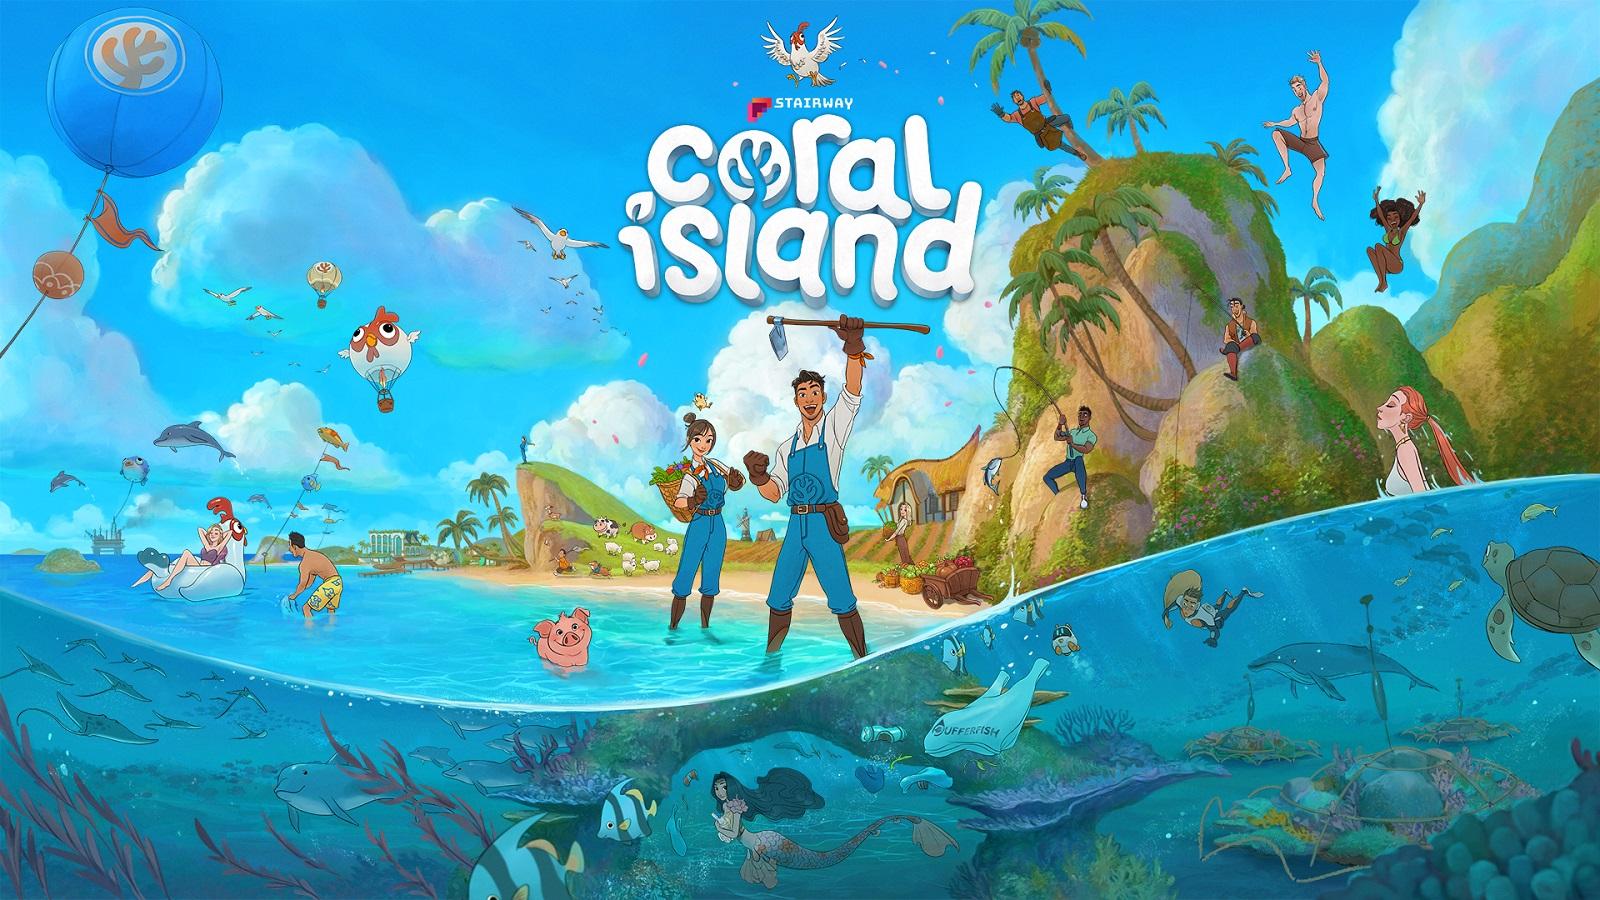 Coral Island Early Access gameplay Reveal